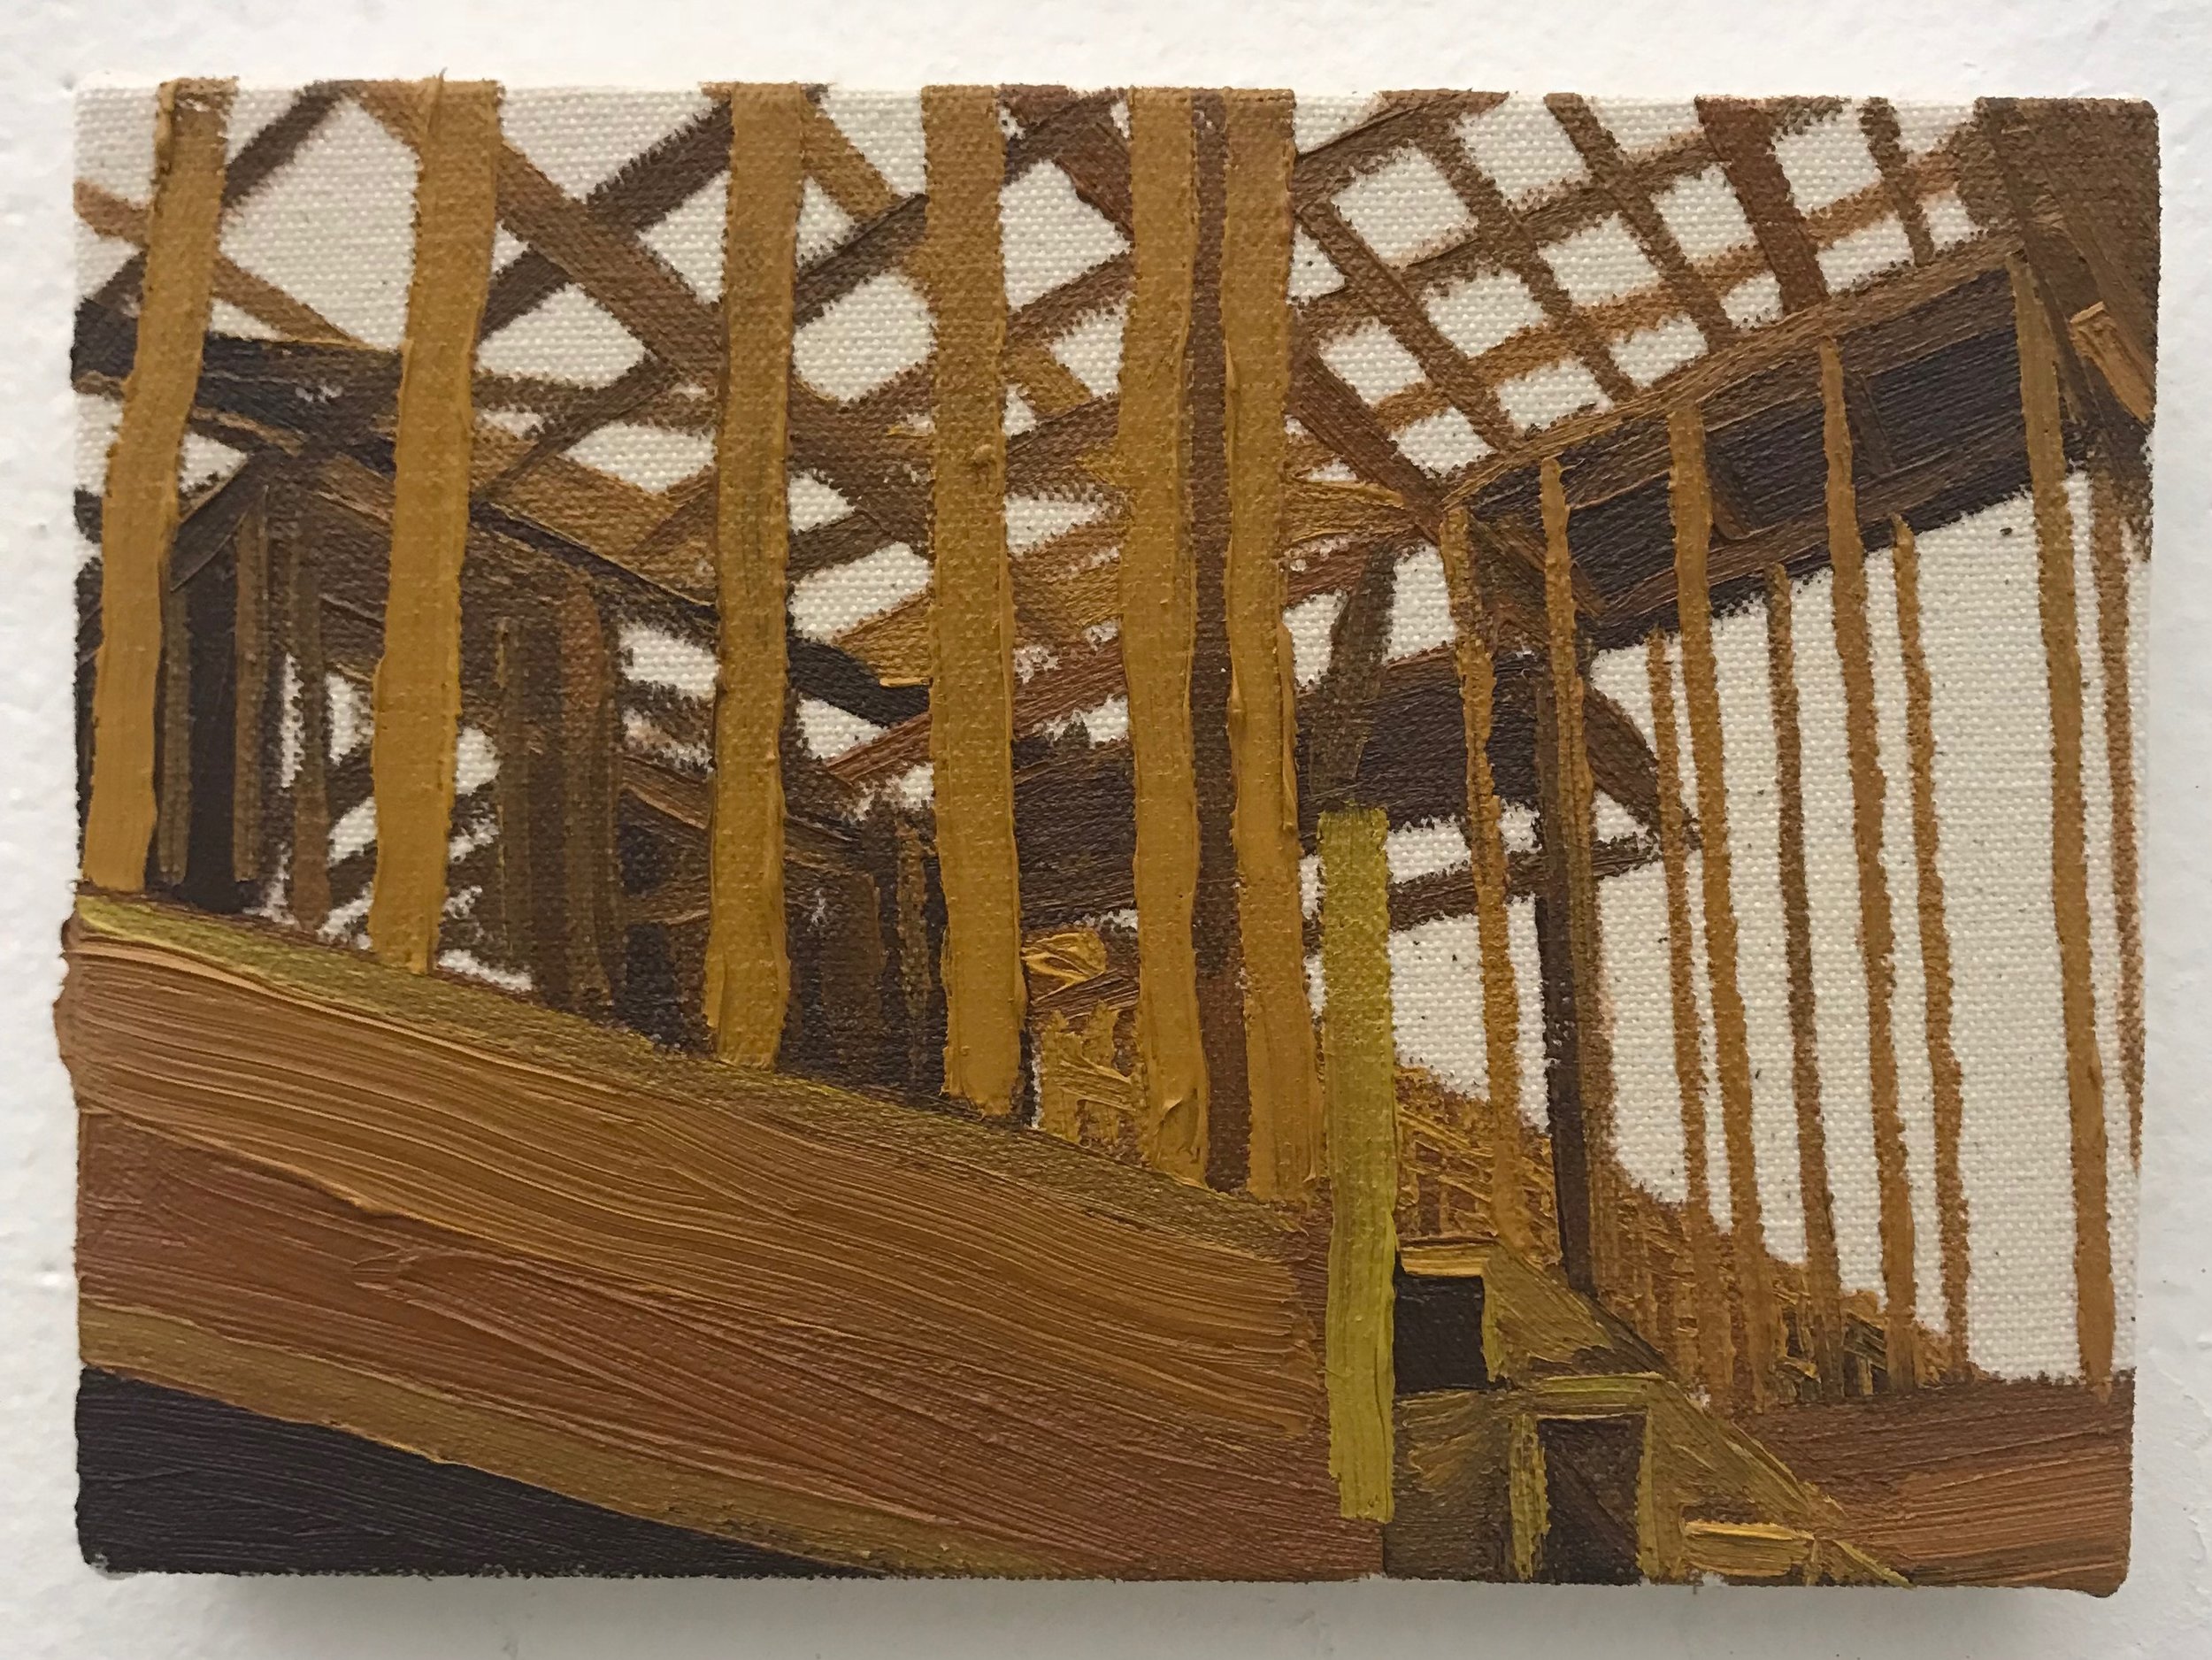 Build the Stairs / 2018 / oil on canvas / 5" x 7"